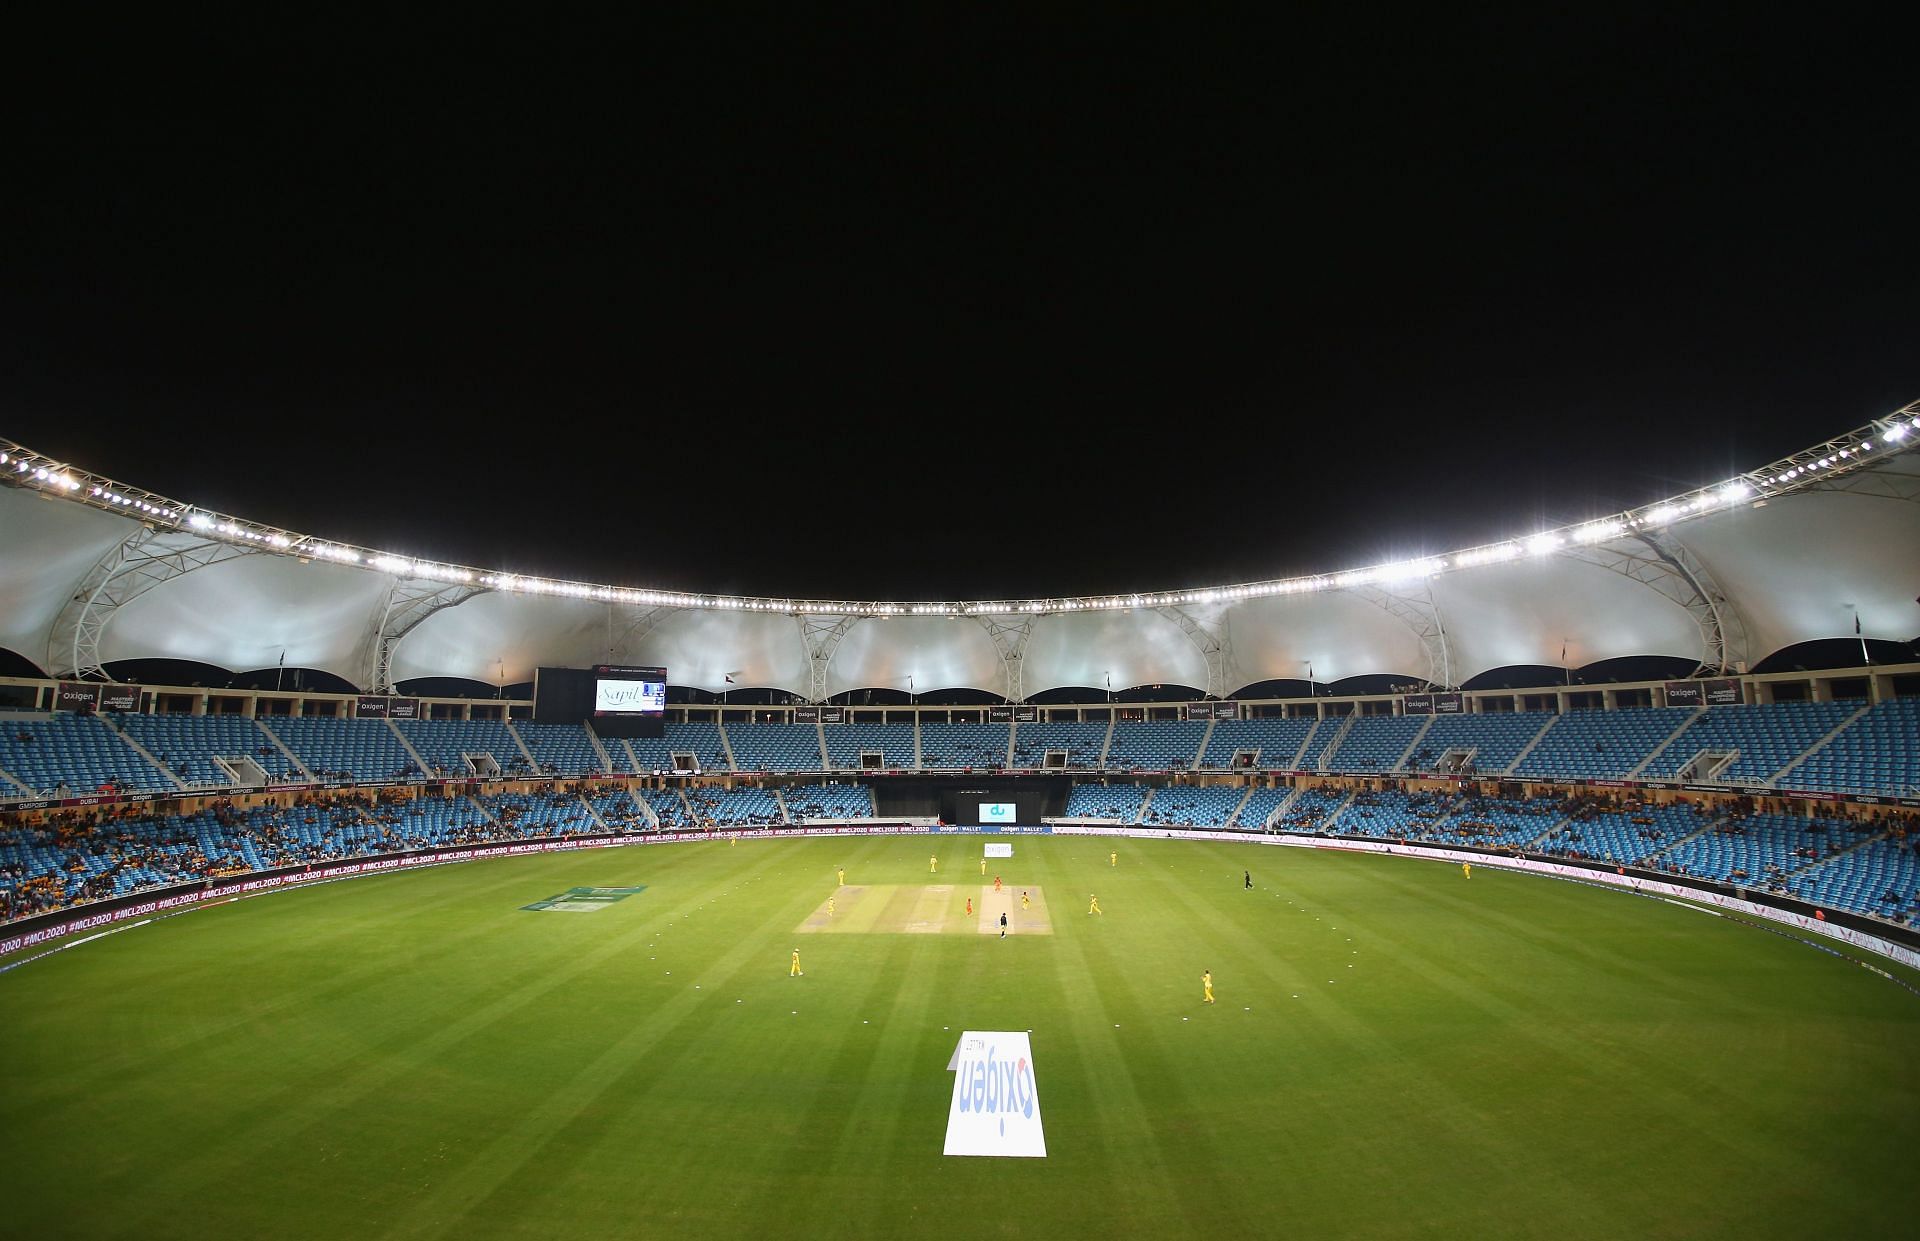 A general view of Dubai International Cricket Stadium, the venue for the final match of T20 World Cup 2021